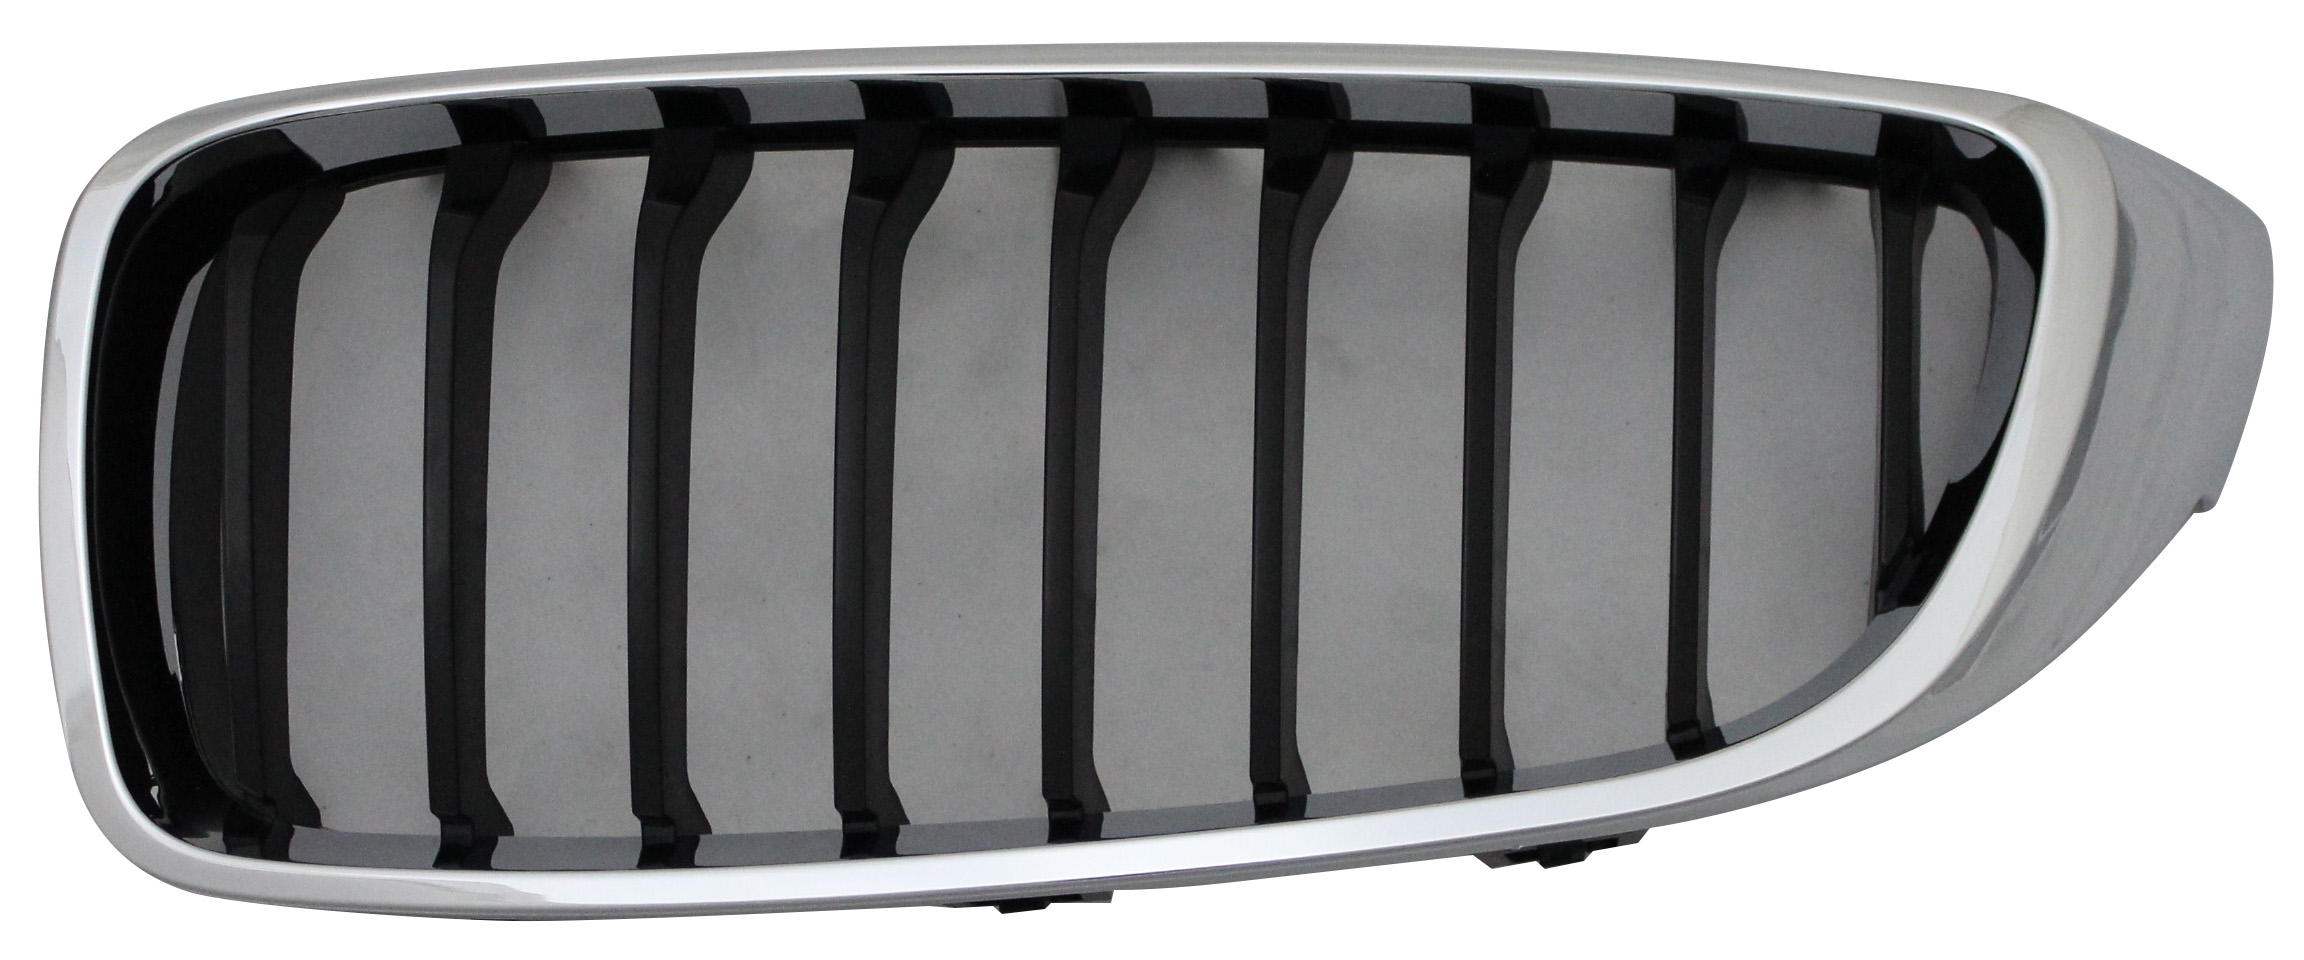 Aftermarket GRILLES for BMW - 440I GRAN COUPE, 440i Gran Coupe,17-19,Grille assy